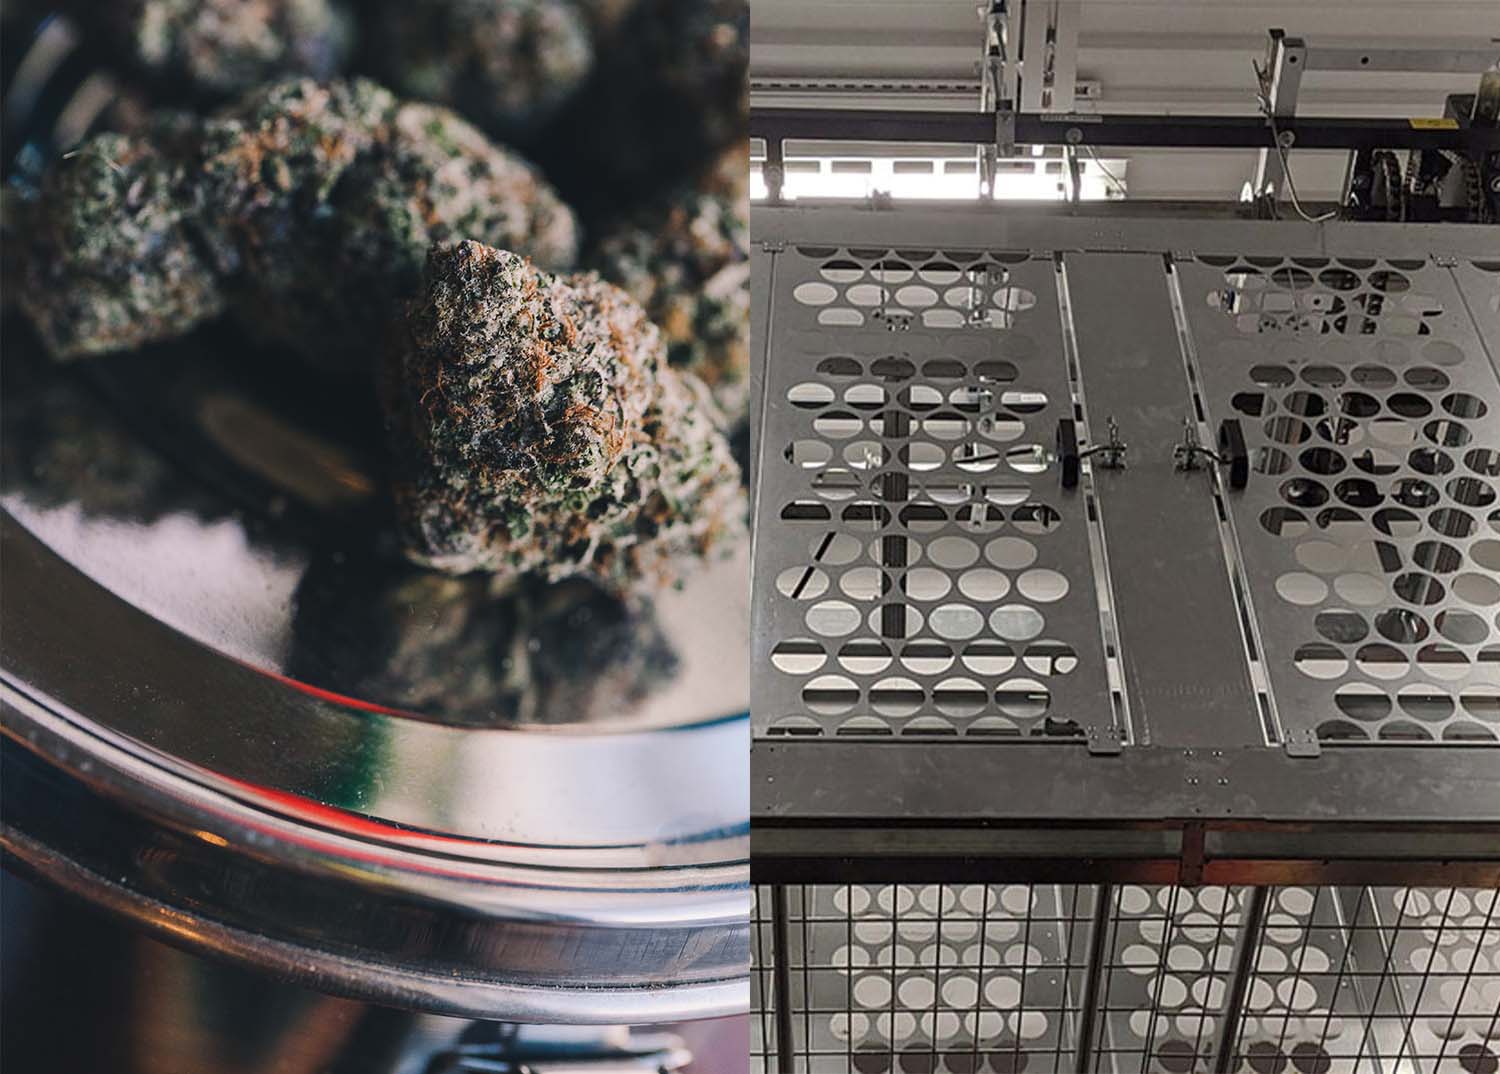 Tips for Achieving the Best Commercial Cannabis Storage Setup